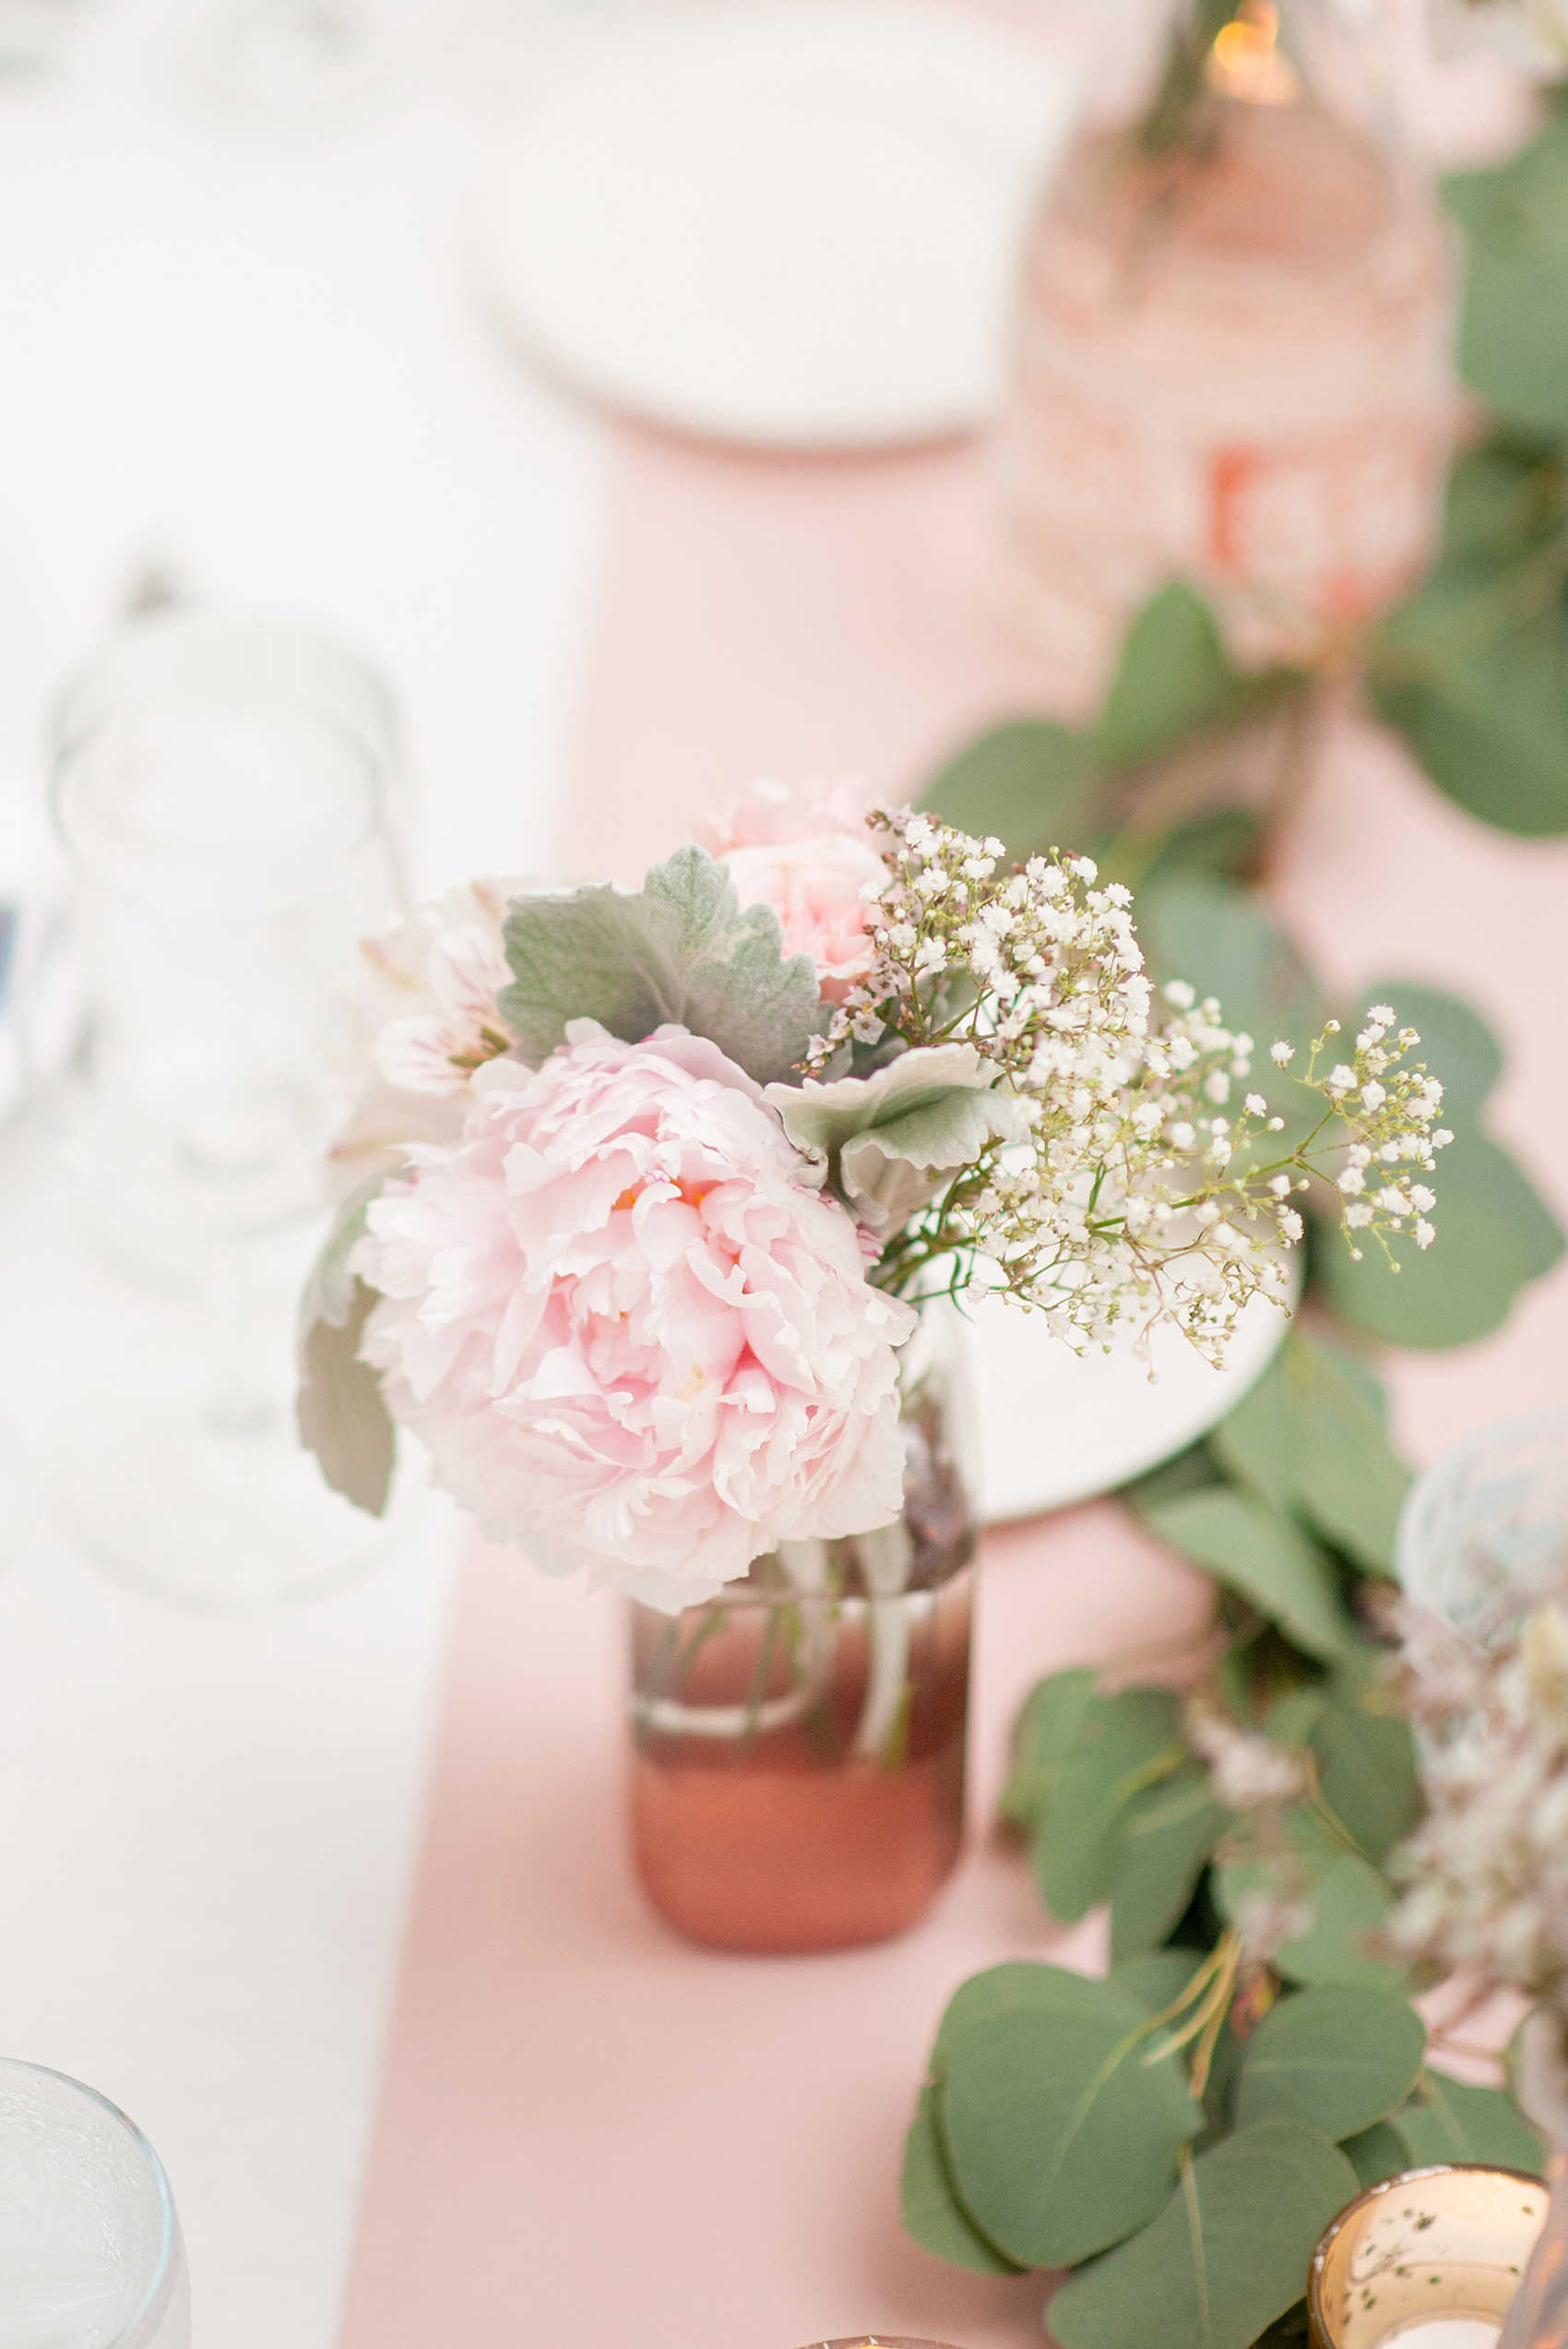 Mikkel Paige Photography photo of a wedding at the Madison Hotel in NJ. Photo of the white table at the reception in The Conservatory with pink peonies in bud vases.